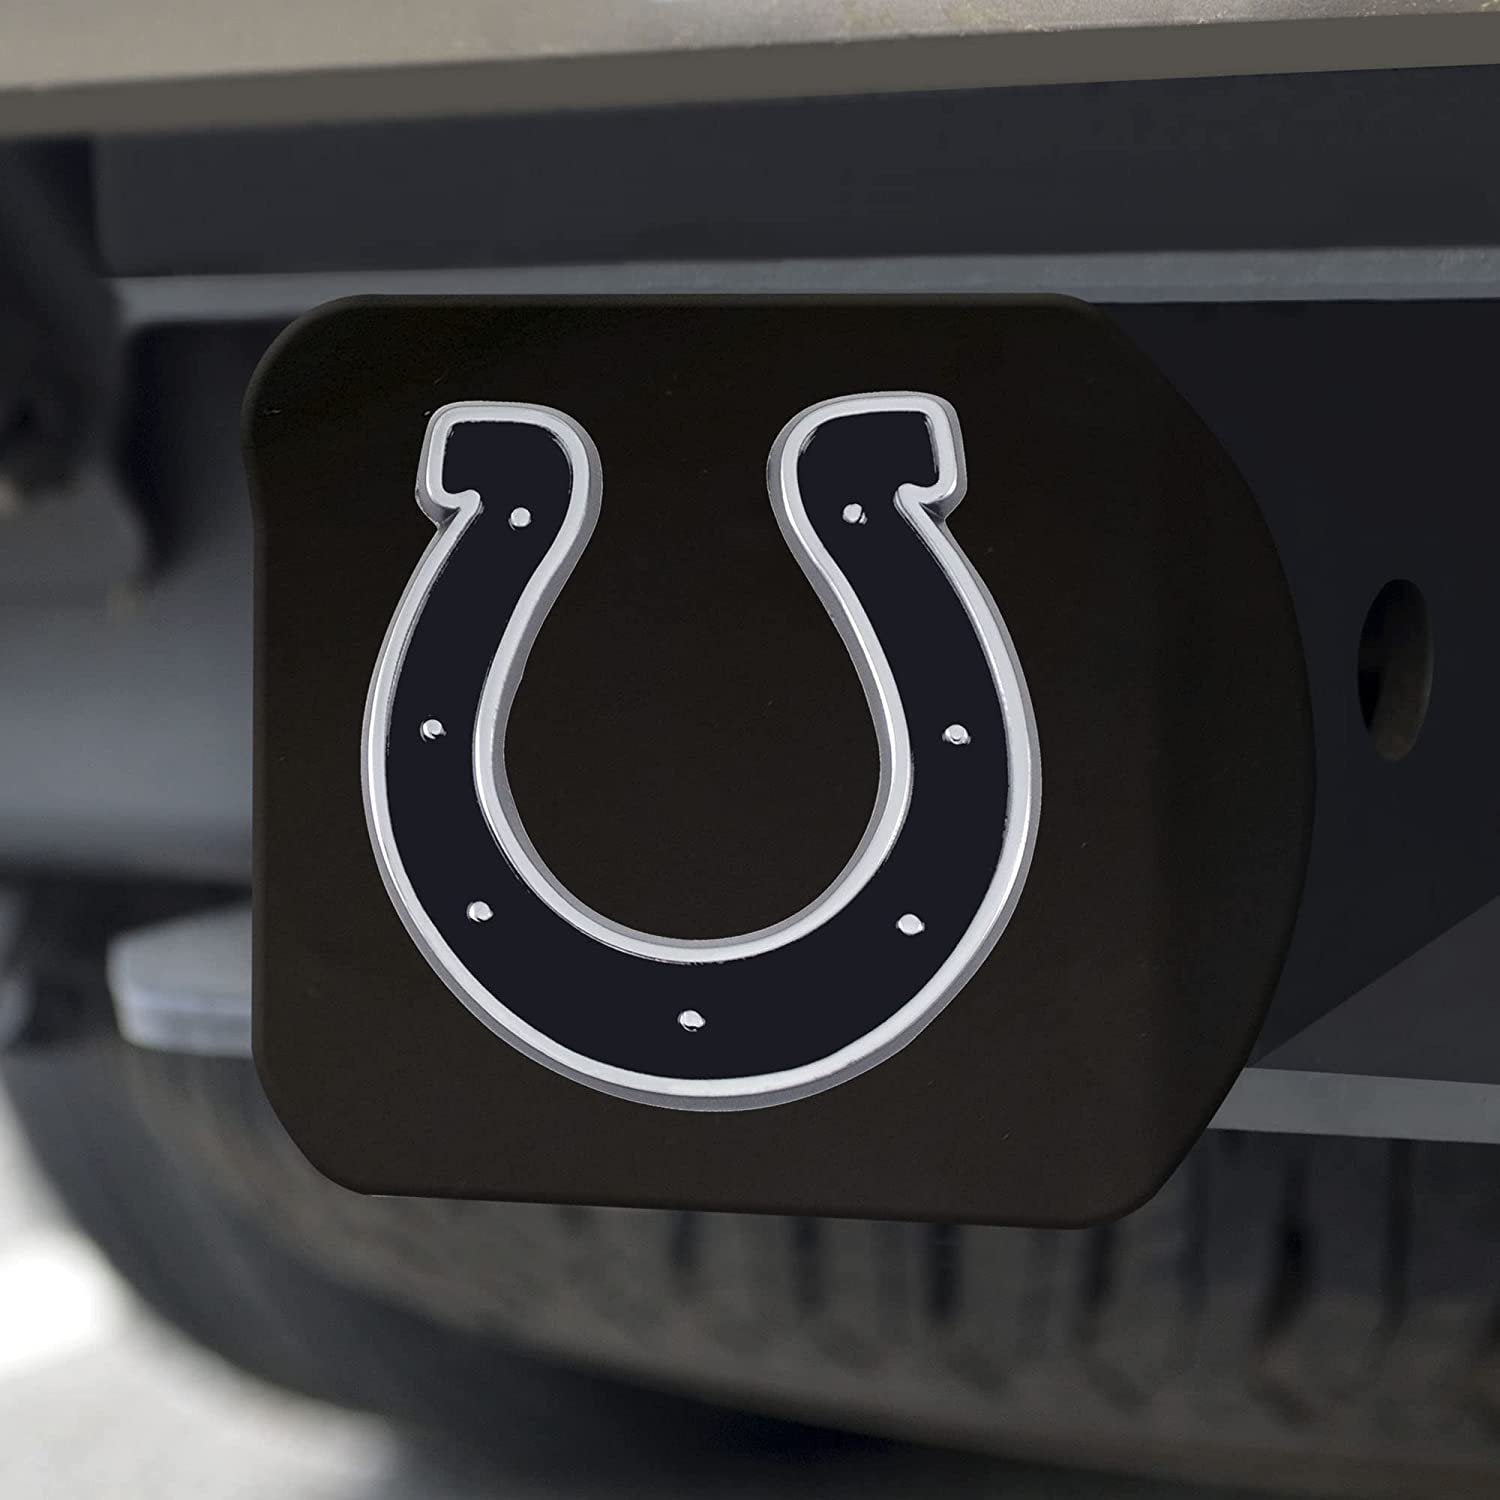 Indianapolis Colts Solid Metal Hitch Cover, Black, 2" Square Type III Hitch Cover